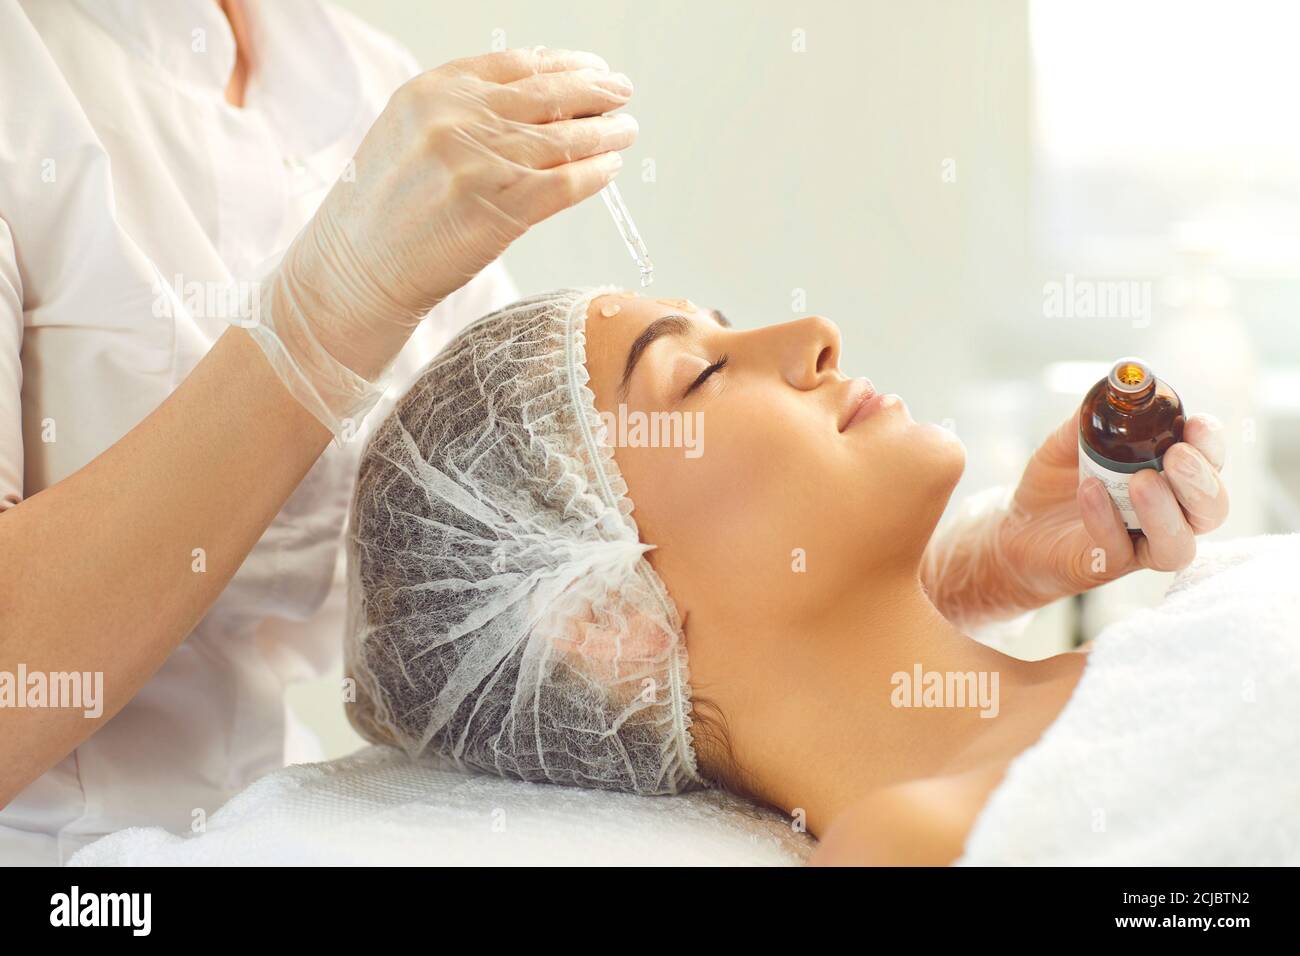 Professional cosmetician using pipette to apply moisturizing serum on client's face Stock Photo